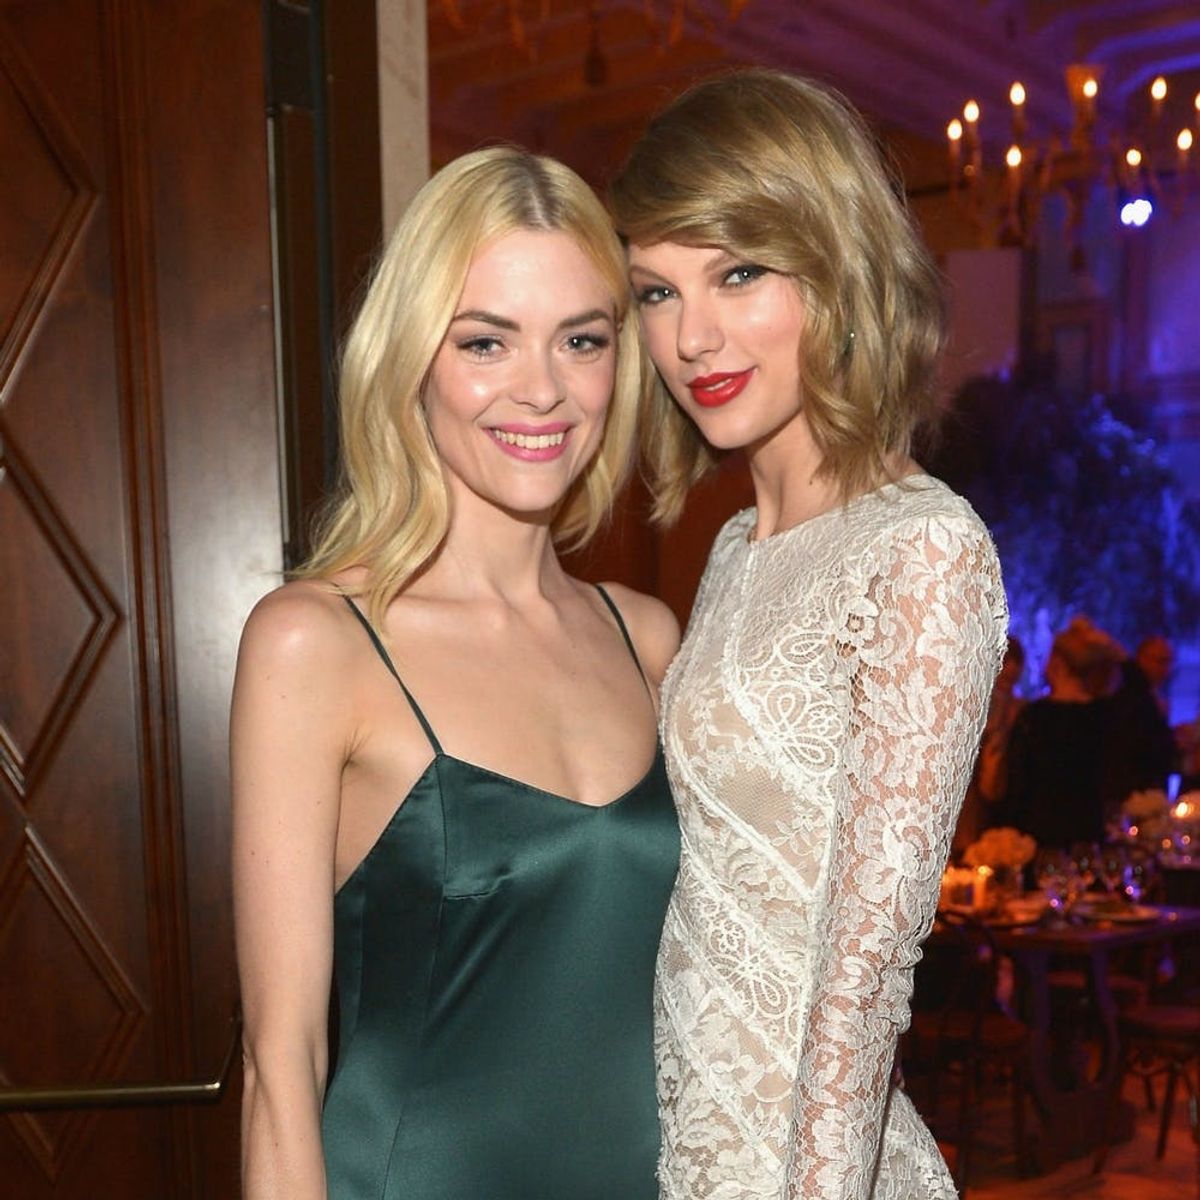 Jaime King’s Sweet Tribute to Her Son on His First Birthday Proves Taylor Swift Is the Best Godmother Ever